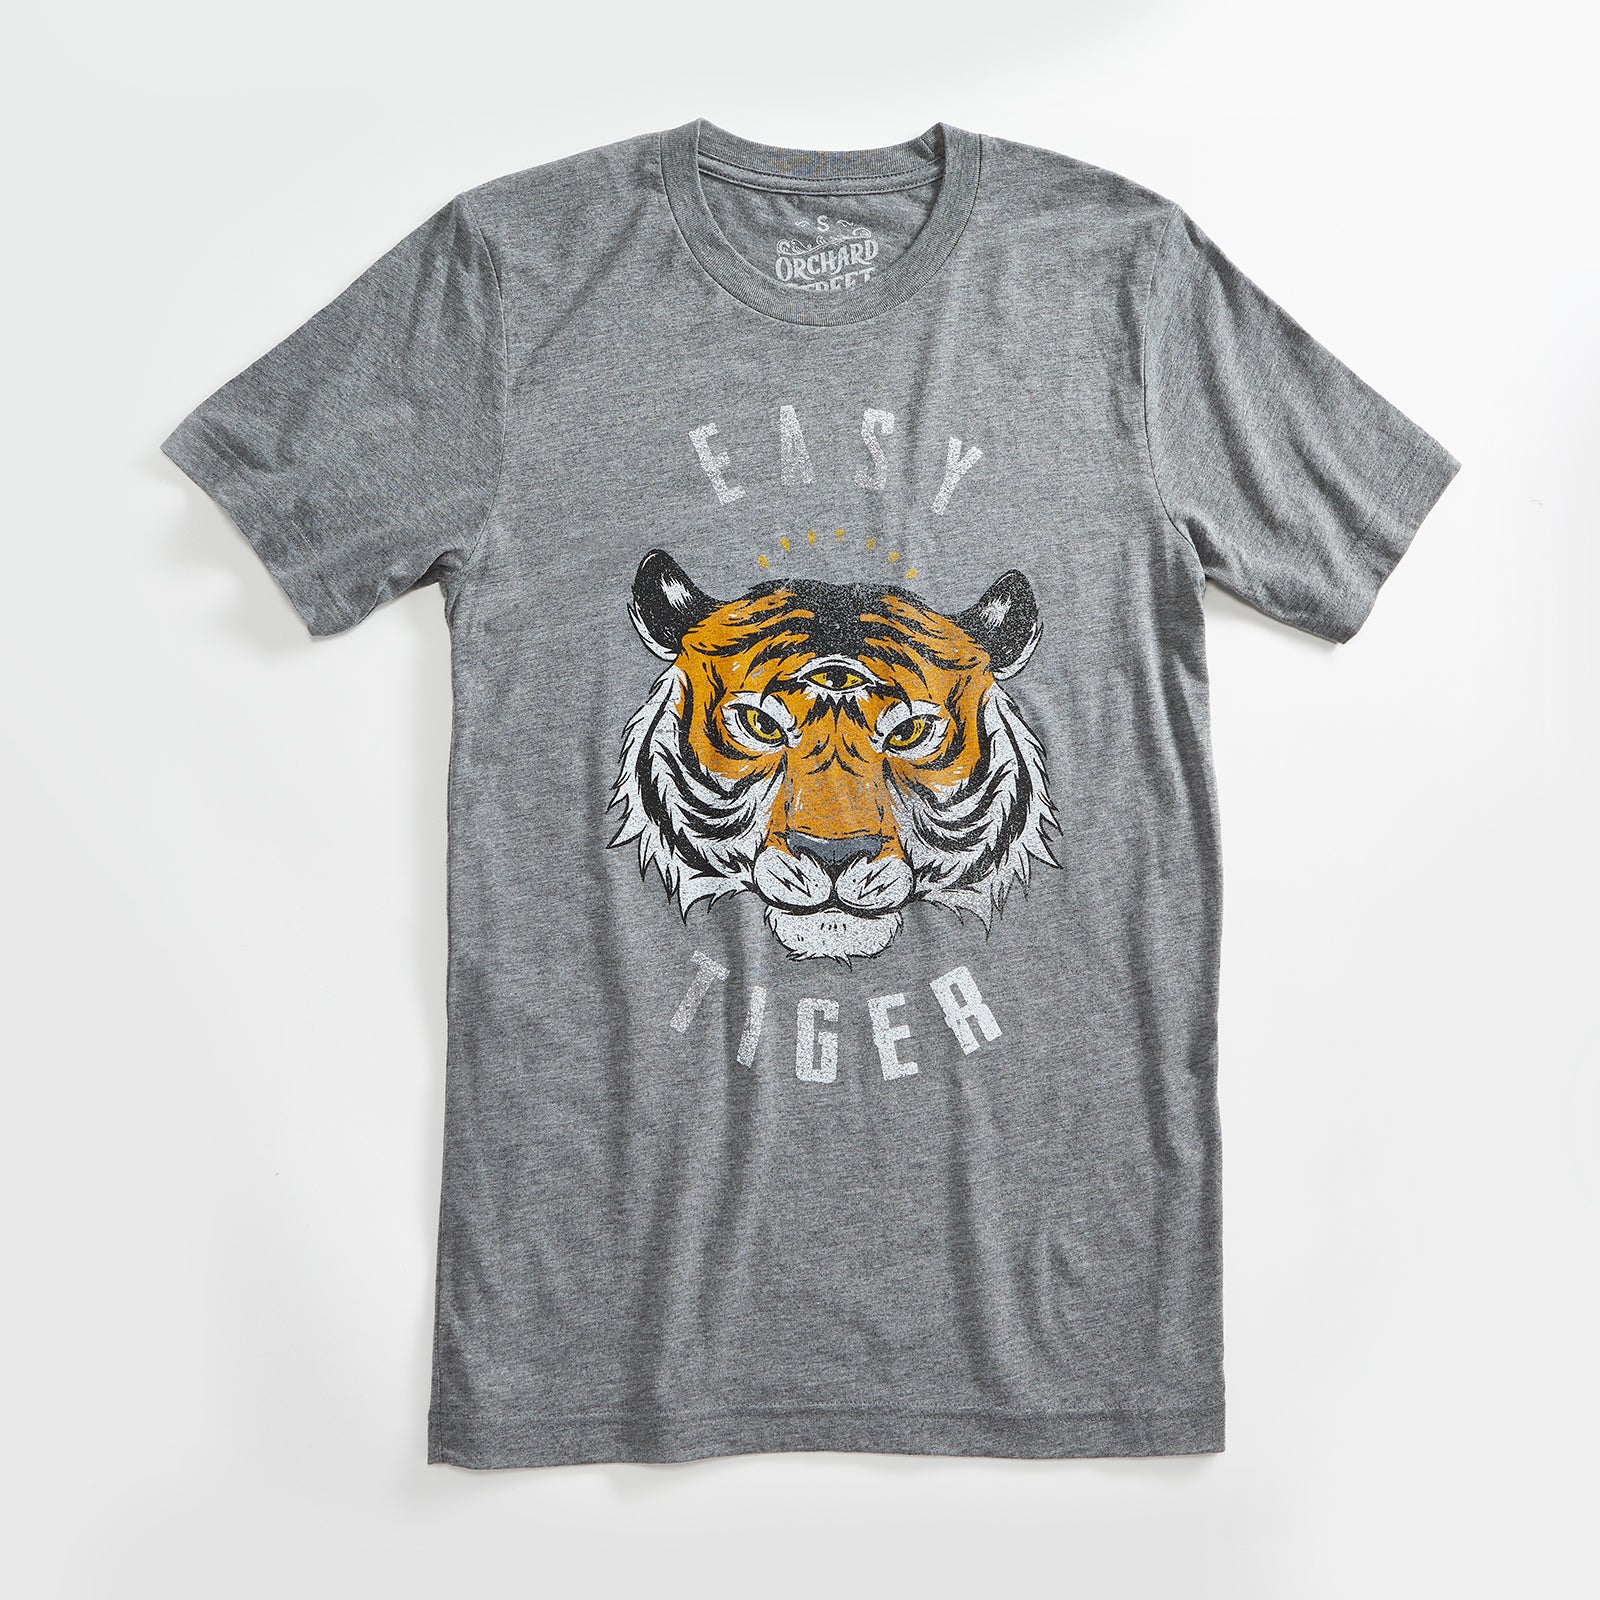 Easy Tiger Vintage Unisex T-Shirt. Slim Fit Heather Grey Tee. Shirt fo –  Orchard Street Apparel